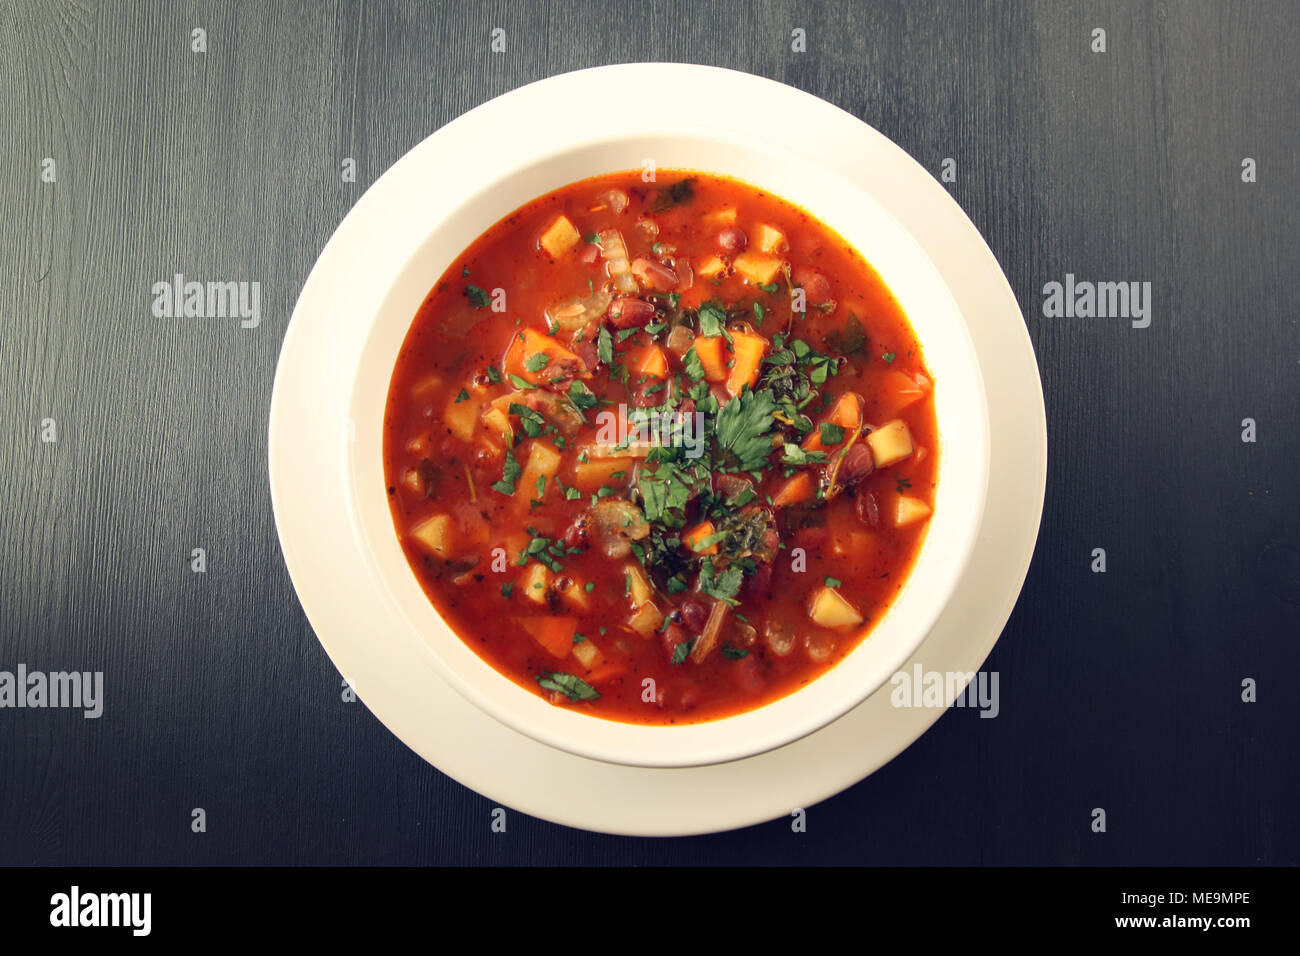 Tomato soup with red beans, potato and carrot. Vegan diet. European cuisine. Vegetarian dish. Main course. Organic meal. Copy space. Top view. Stock Photo